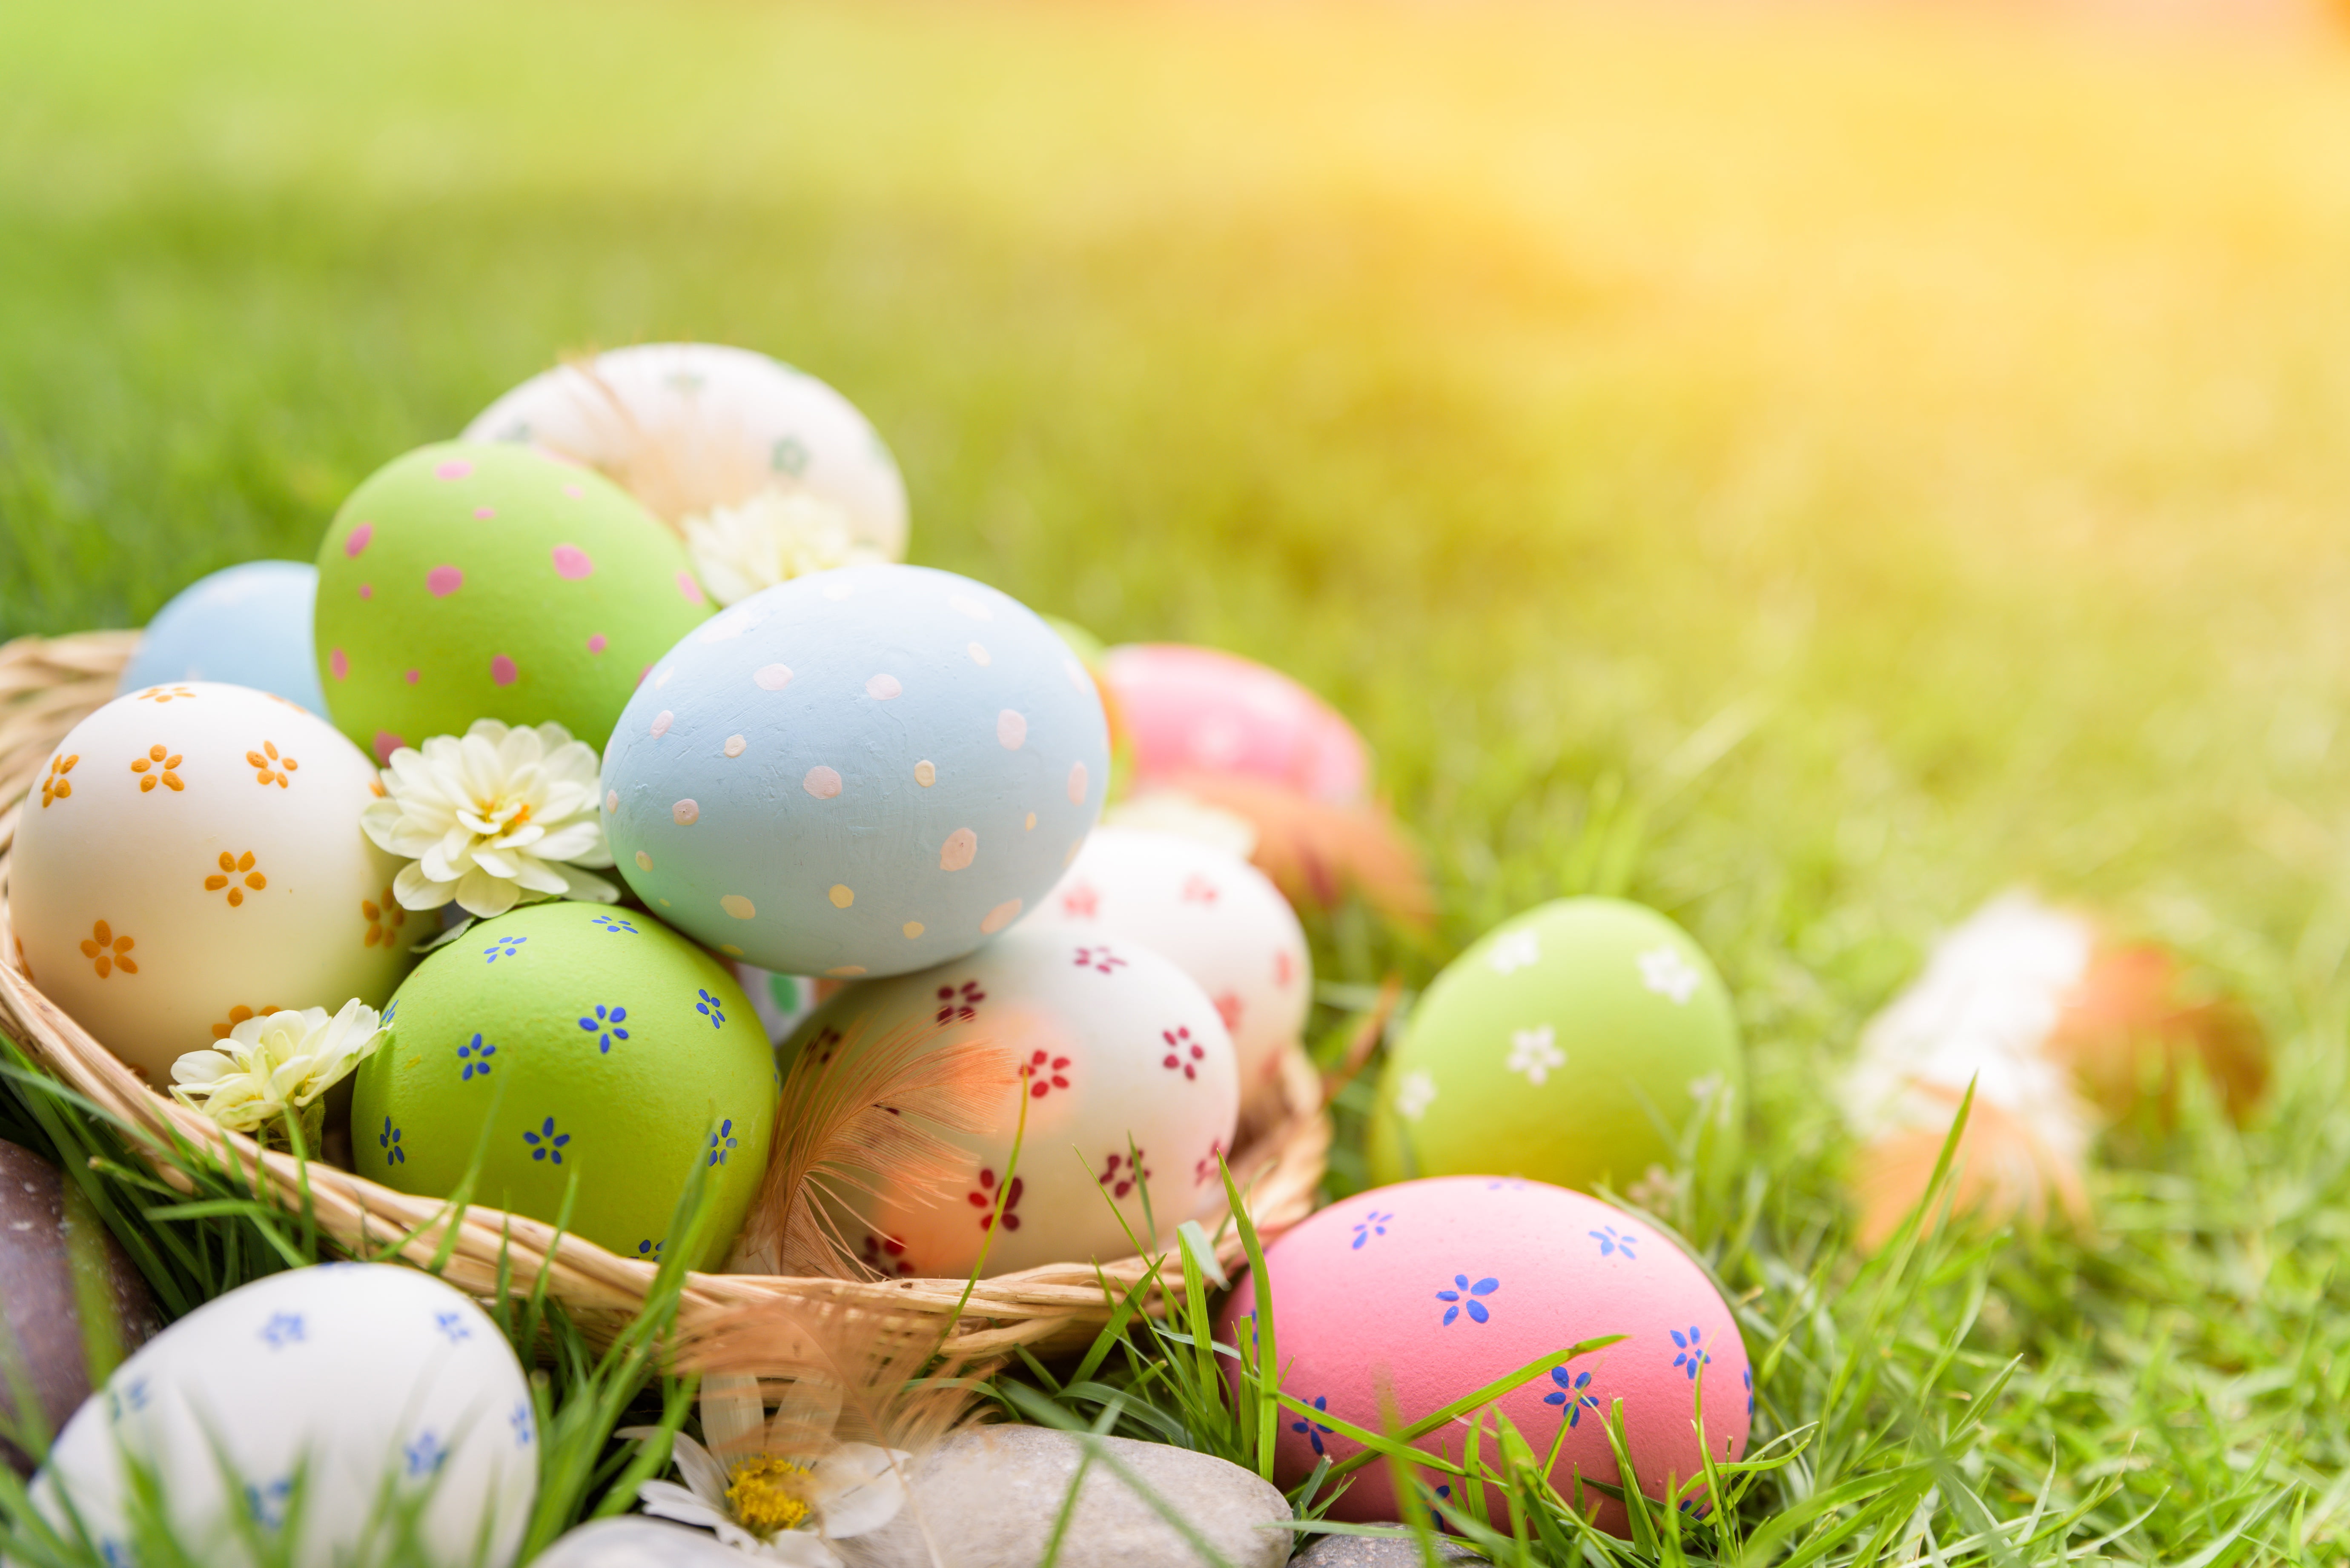 grass, flowers, eggs, Easter, happy, decoration